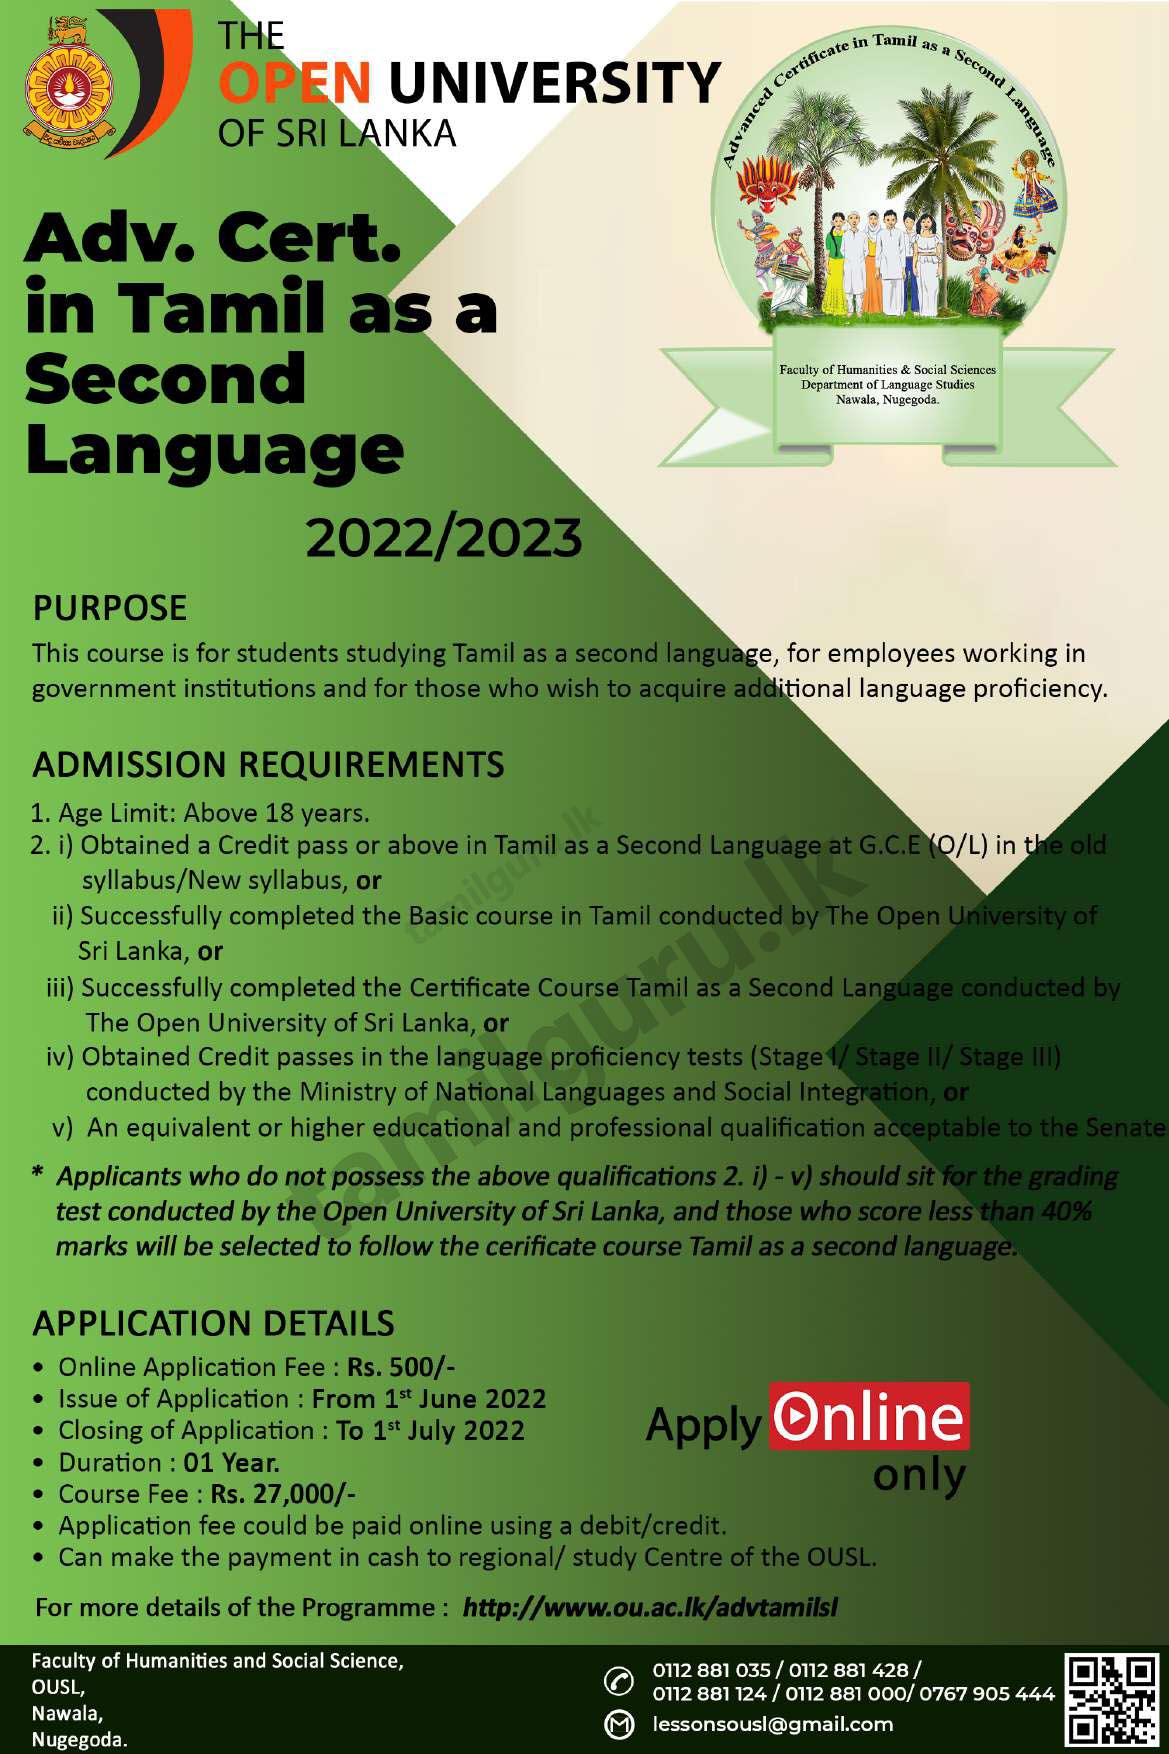 Advanced Certificate in Tamil as a Second Language Course 2022/2023 - The Open University of Sri Lanka (OUSL)